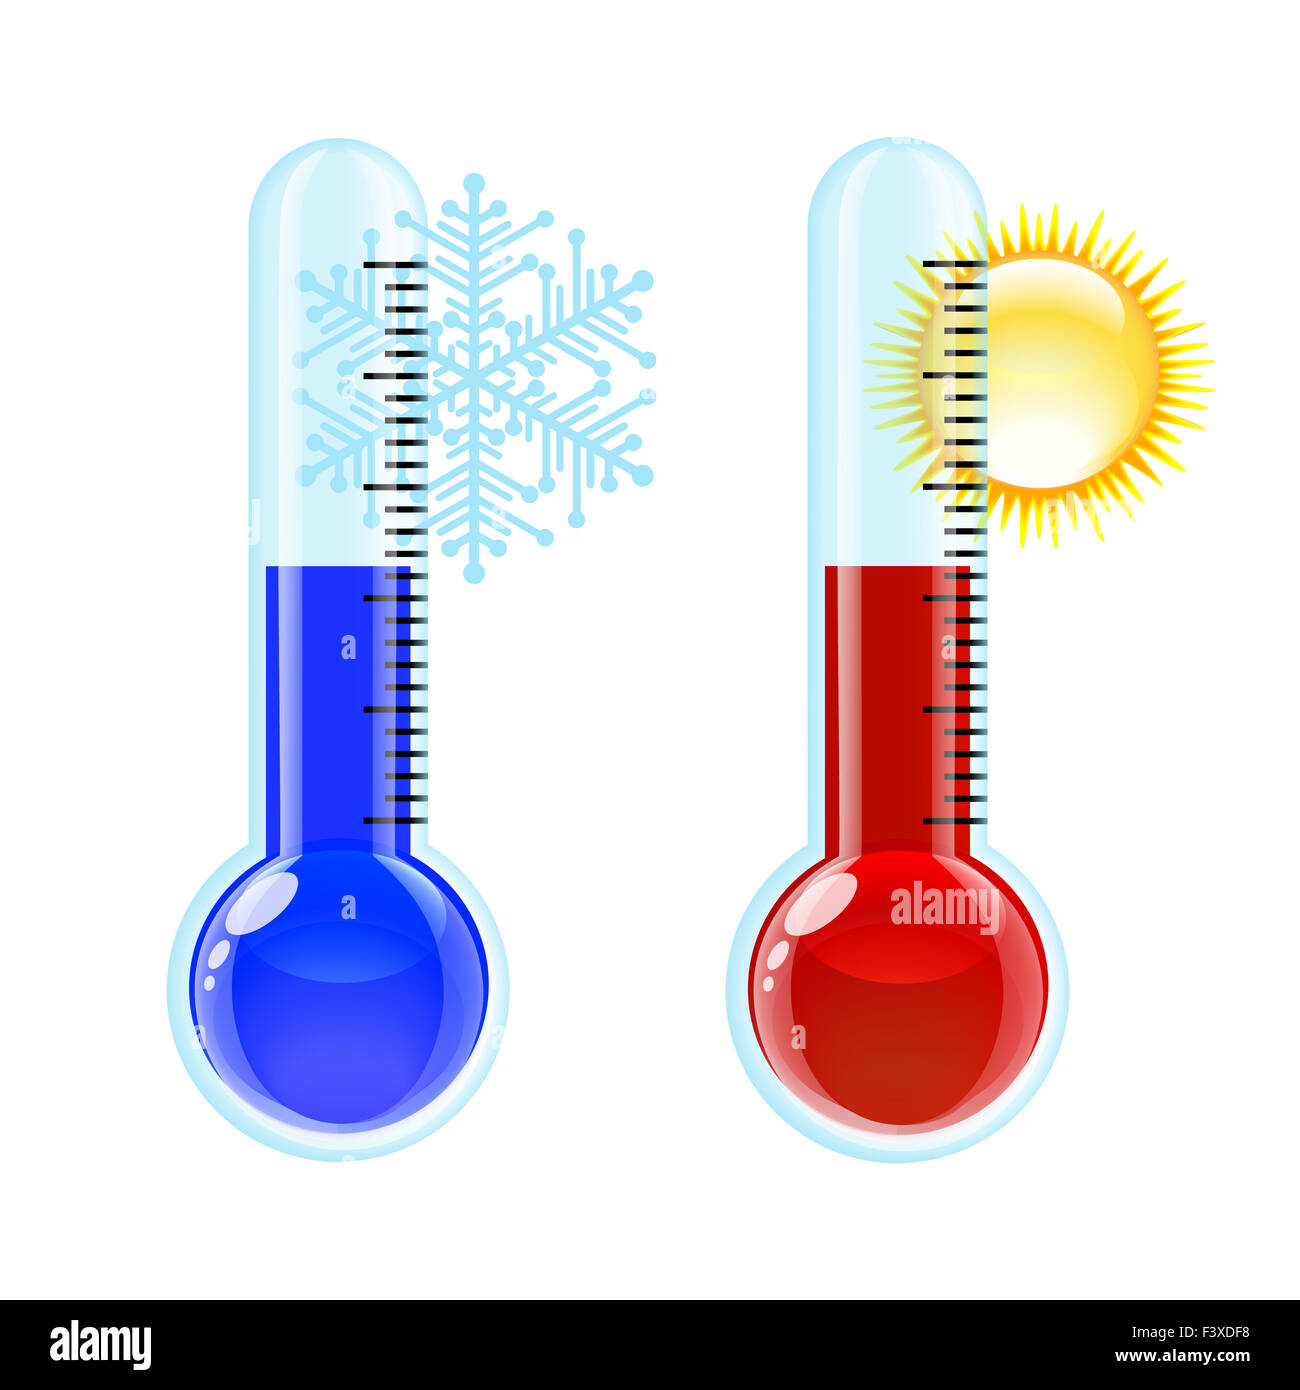 https://c8.alamy.com/comp/F3XDF8/thermometer-hot-and-cold-icon-F3XDF8.jpg